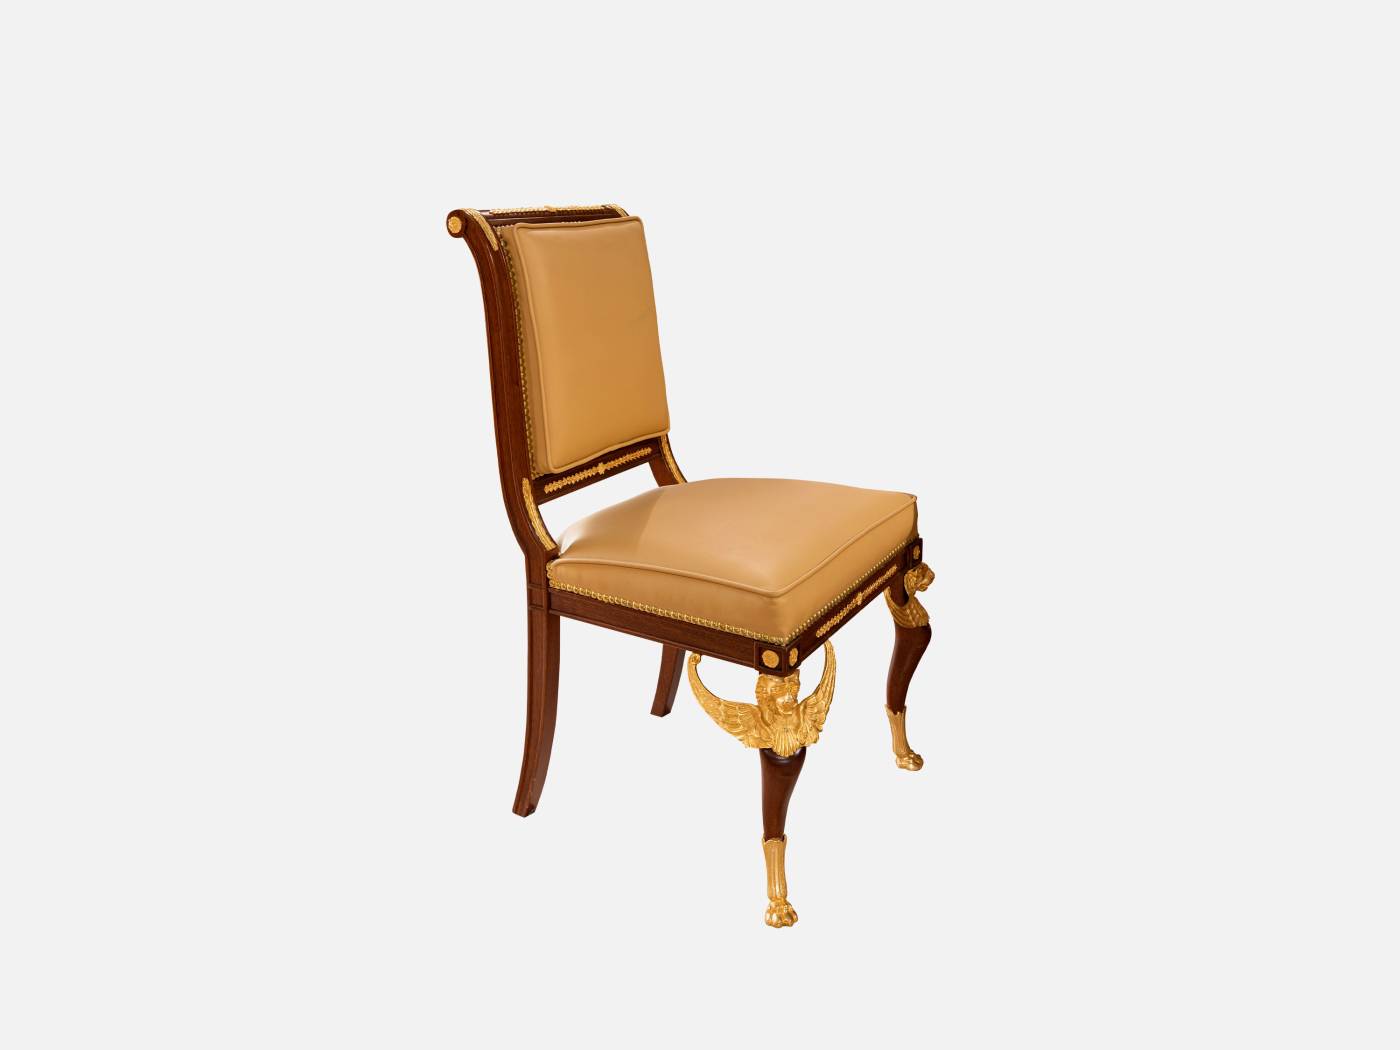 ART. 781 – The elegance of luxury classic Chairs made in Italy by C.G. Capelletti.